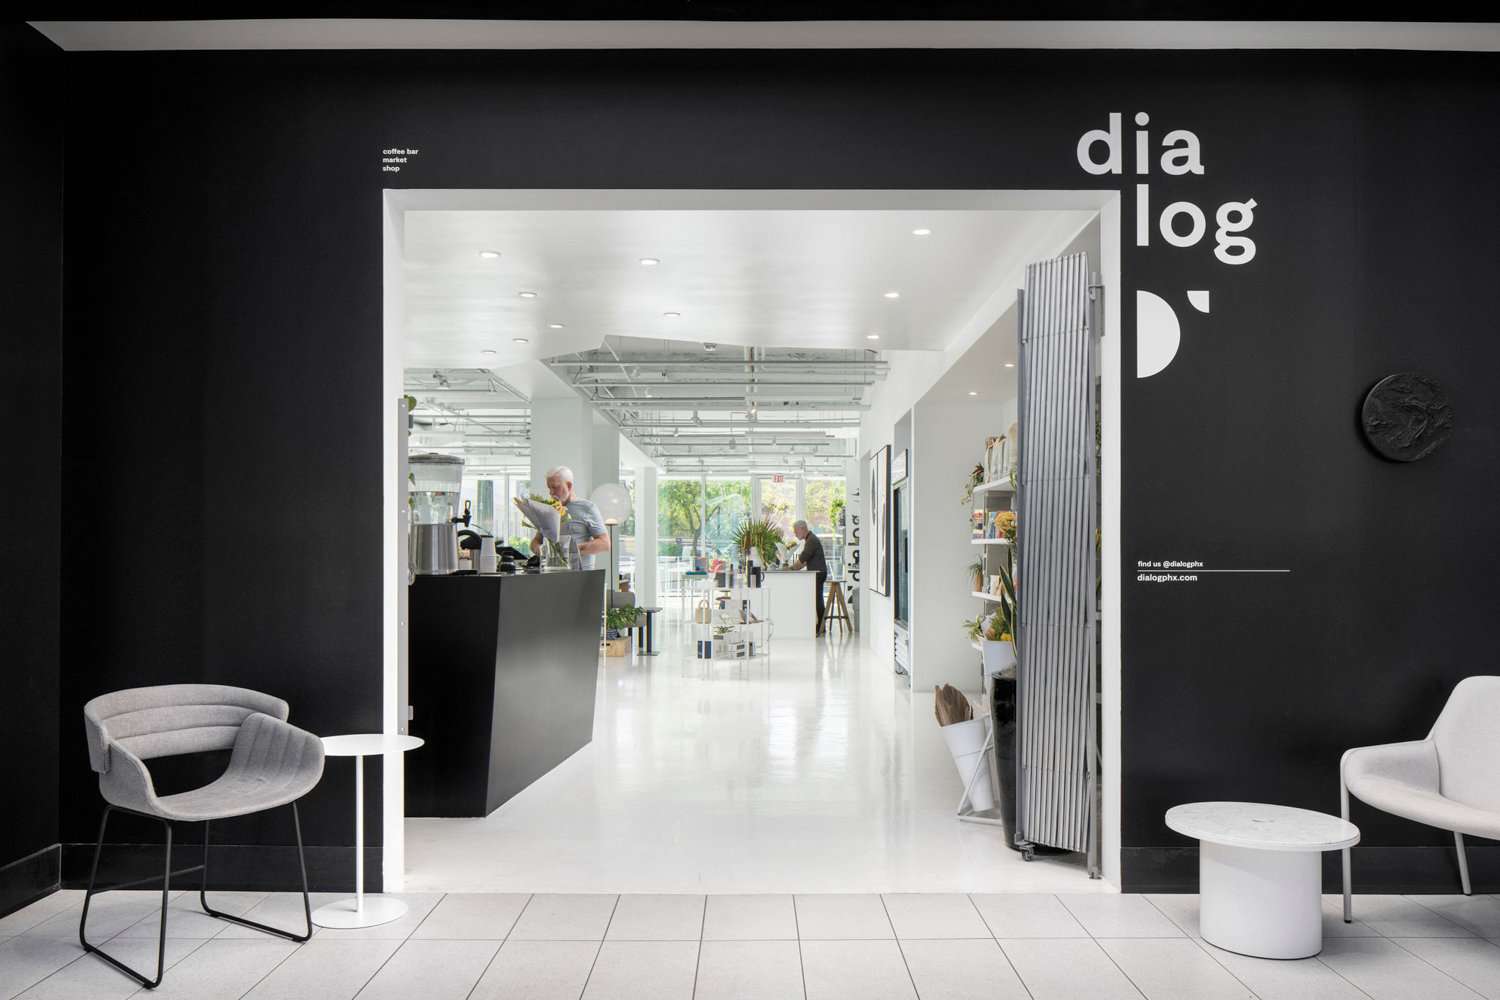 Entrance to dialog shop, featuring black-and-white design scheme.